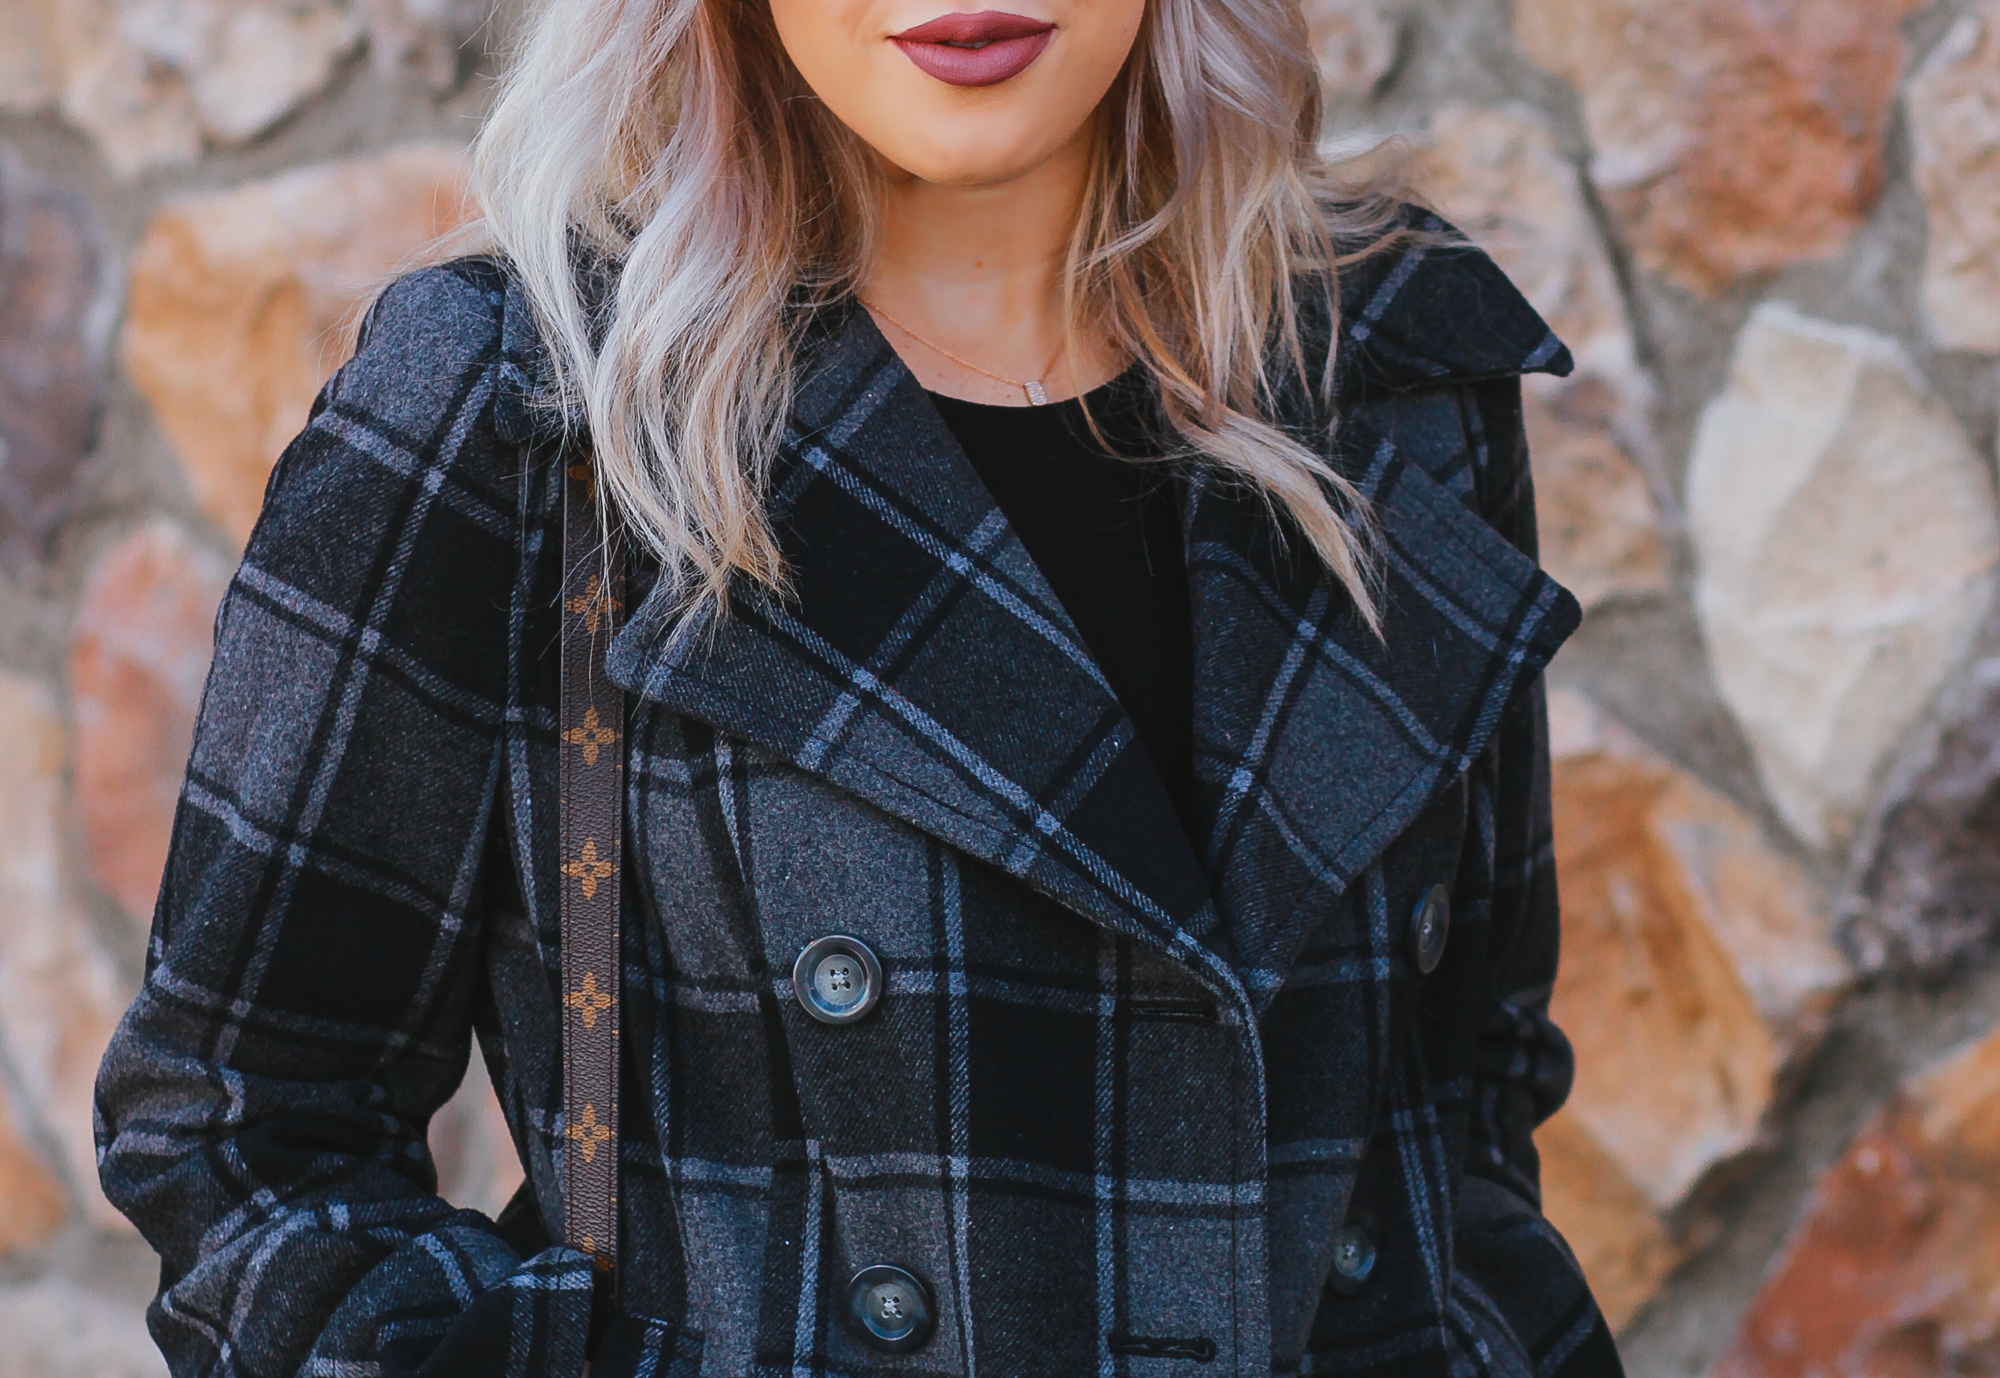 Blondie in the City | Plaid, Tights, Boots, Louis Vuitton